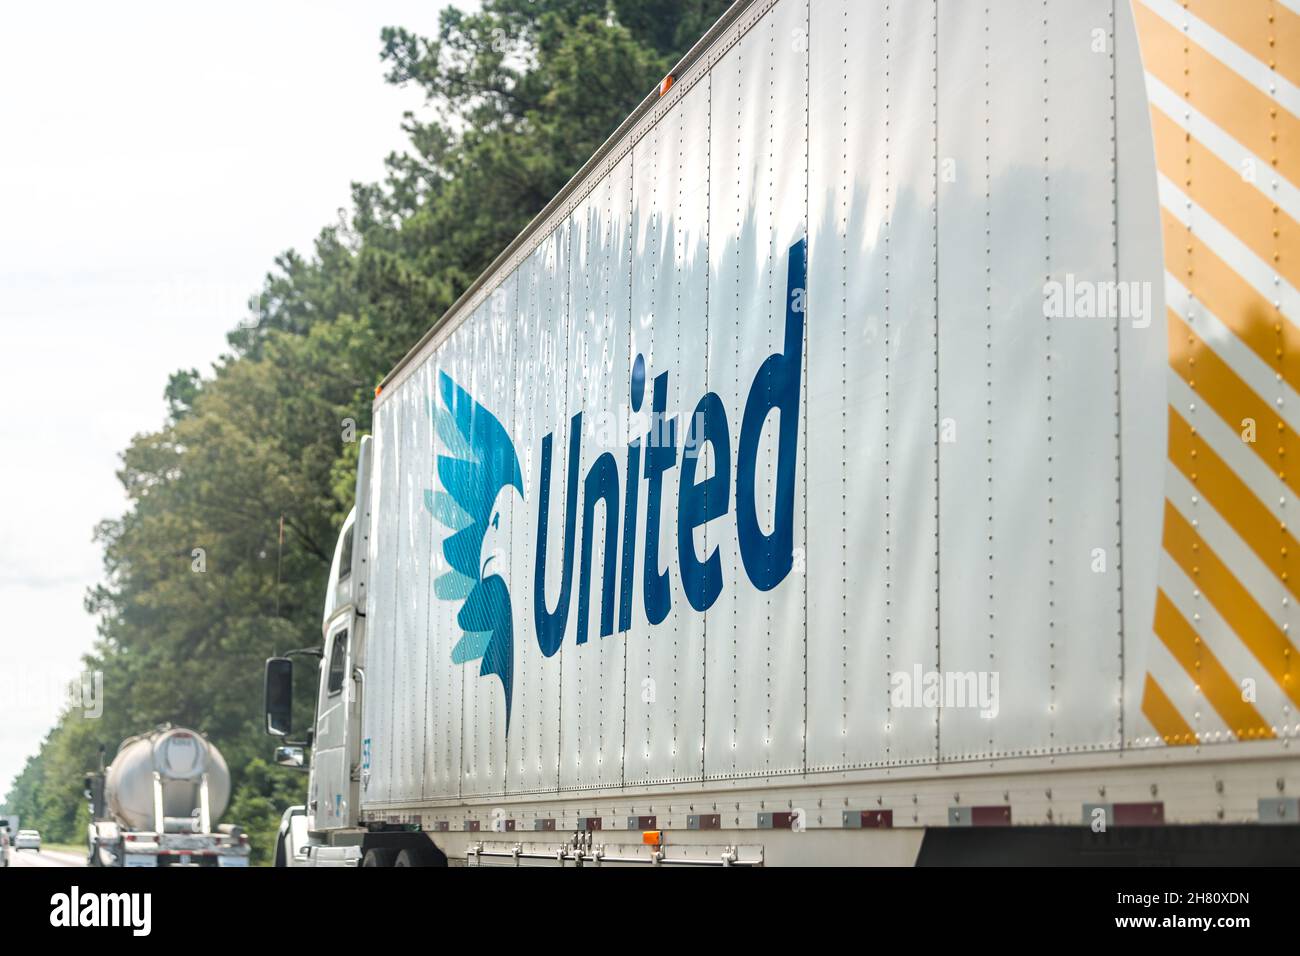 Orangeburg, USA - July 6, 2021: Interstate highway i26 26 in South Carolina with large truck sign container for United Van Lines moving company logo w Stock Photo